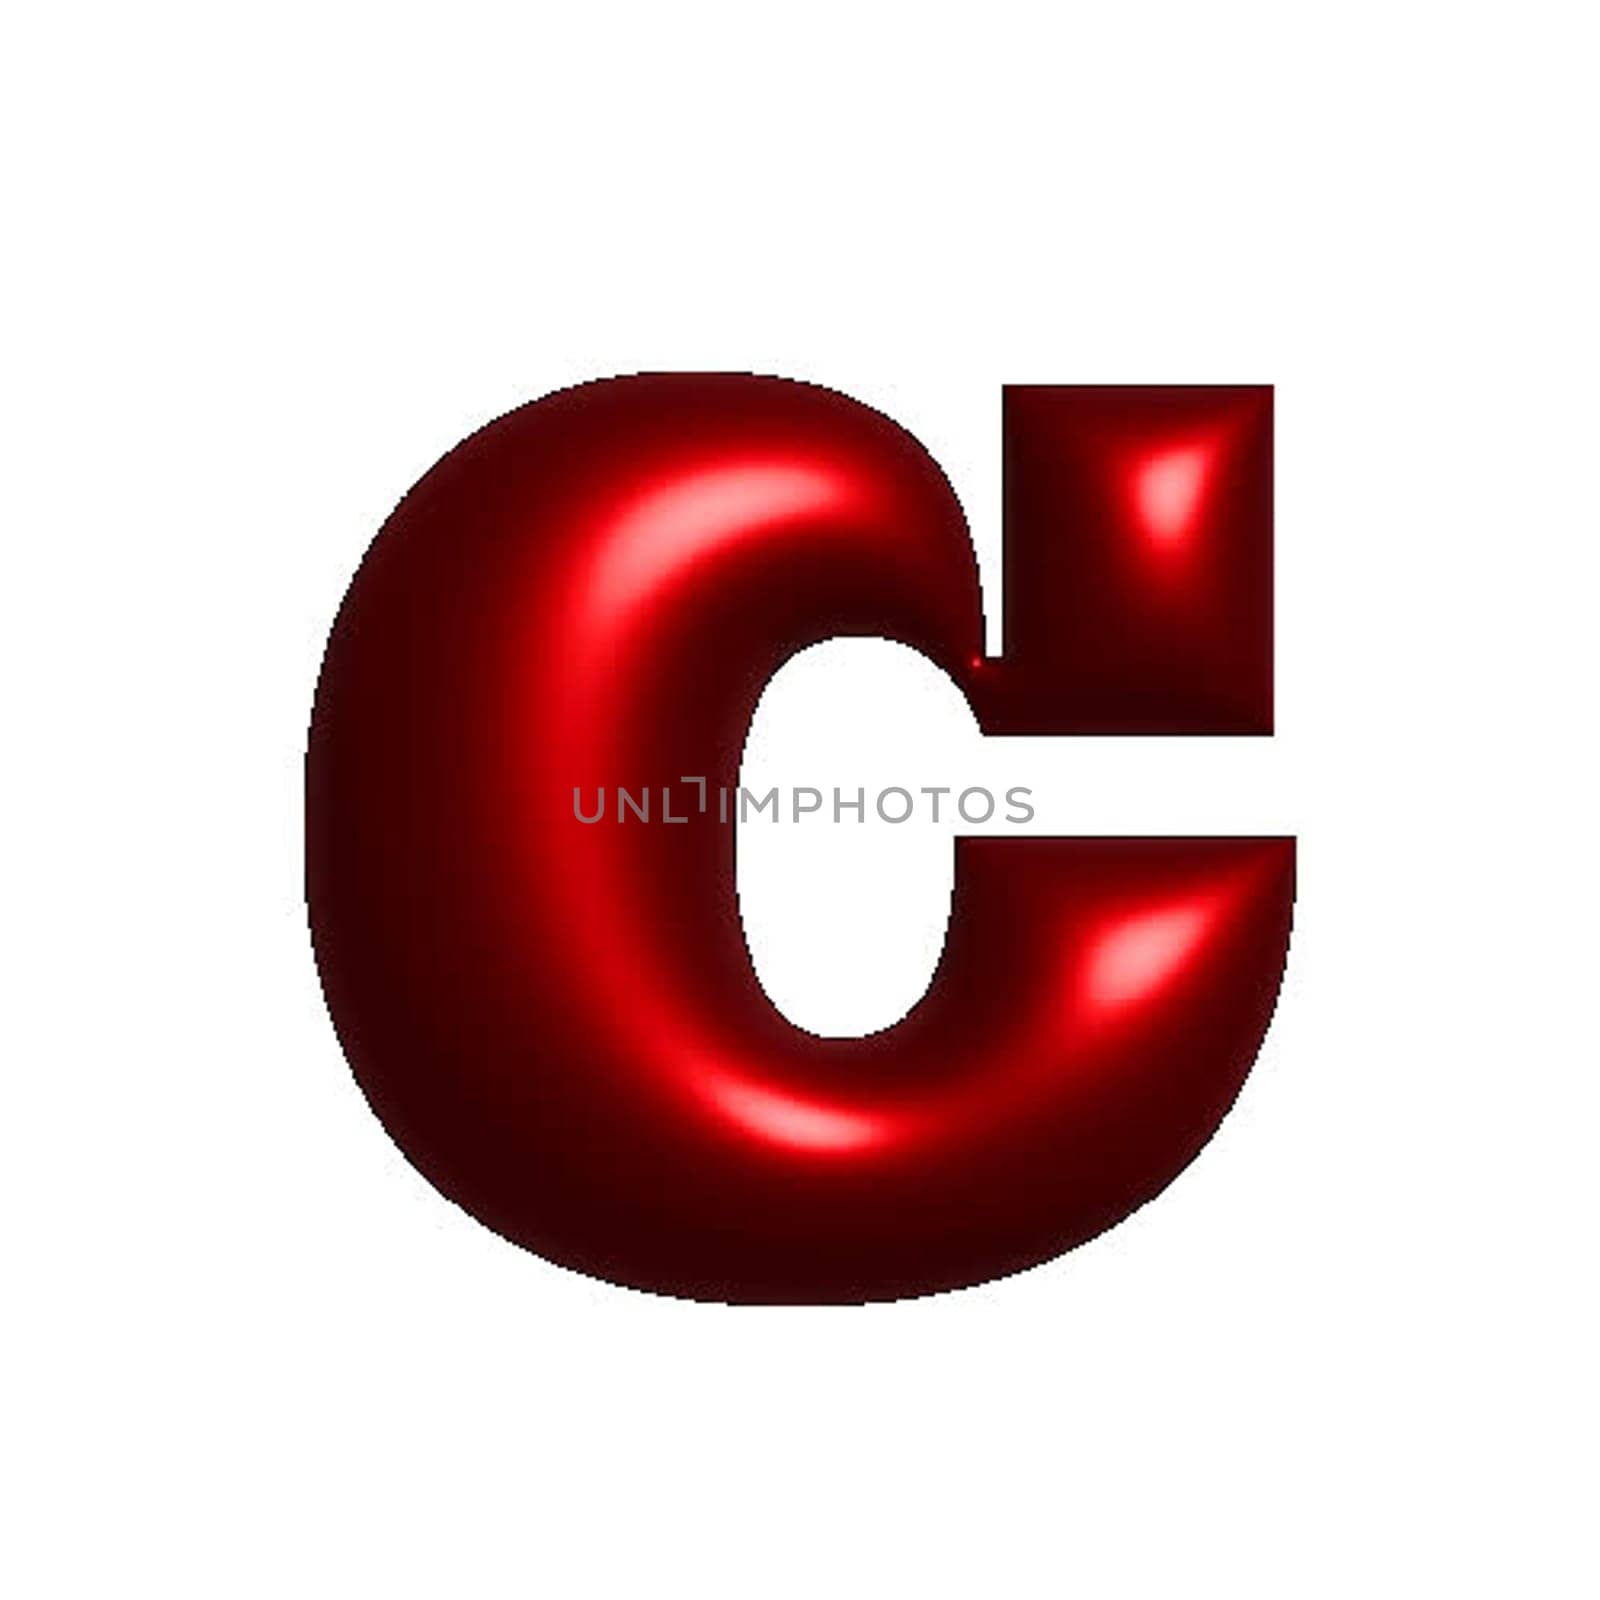 Red metal shiny reflective letter C 3D illustration by Dustick